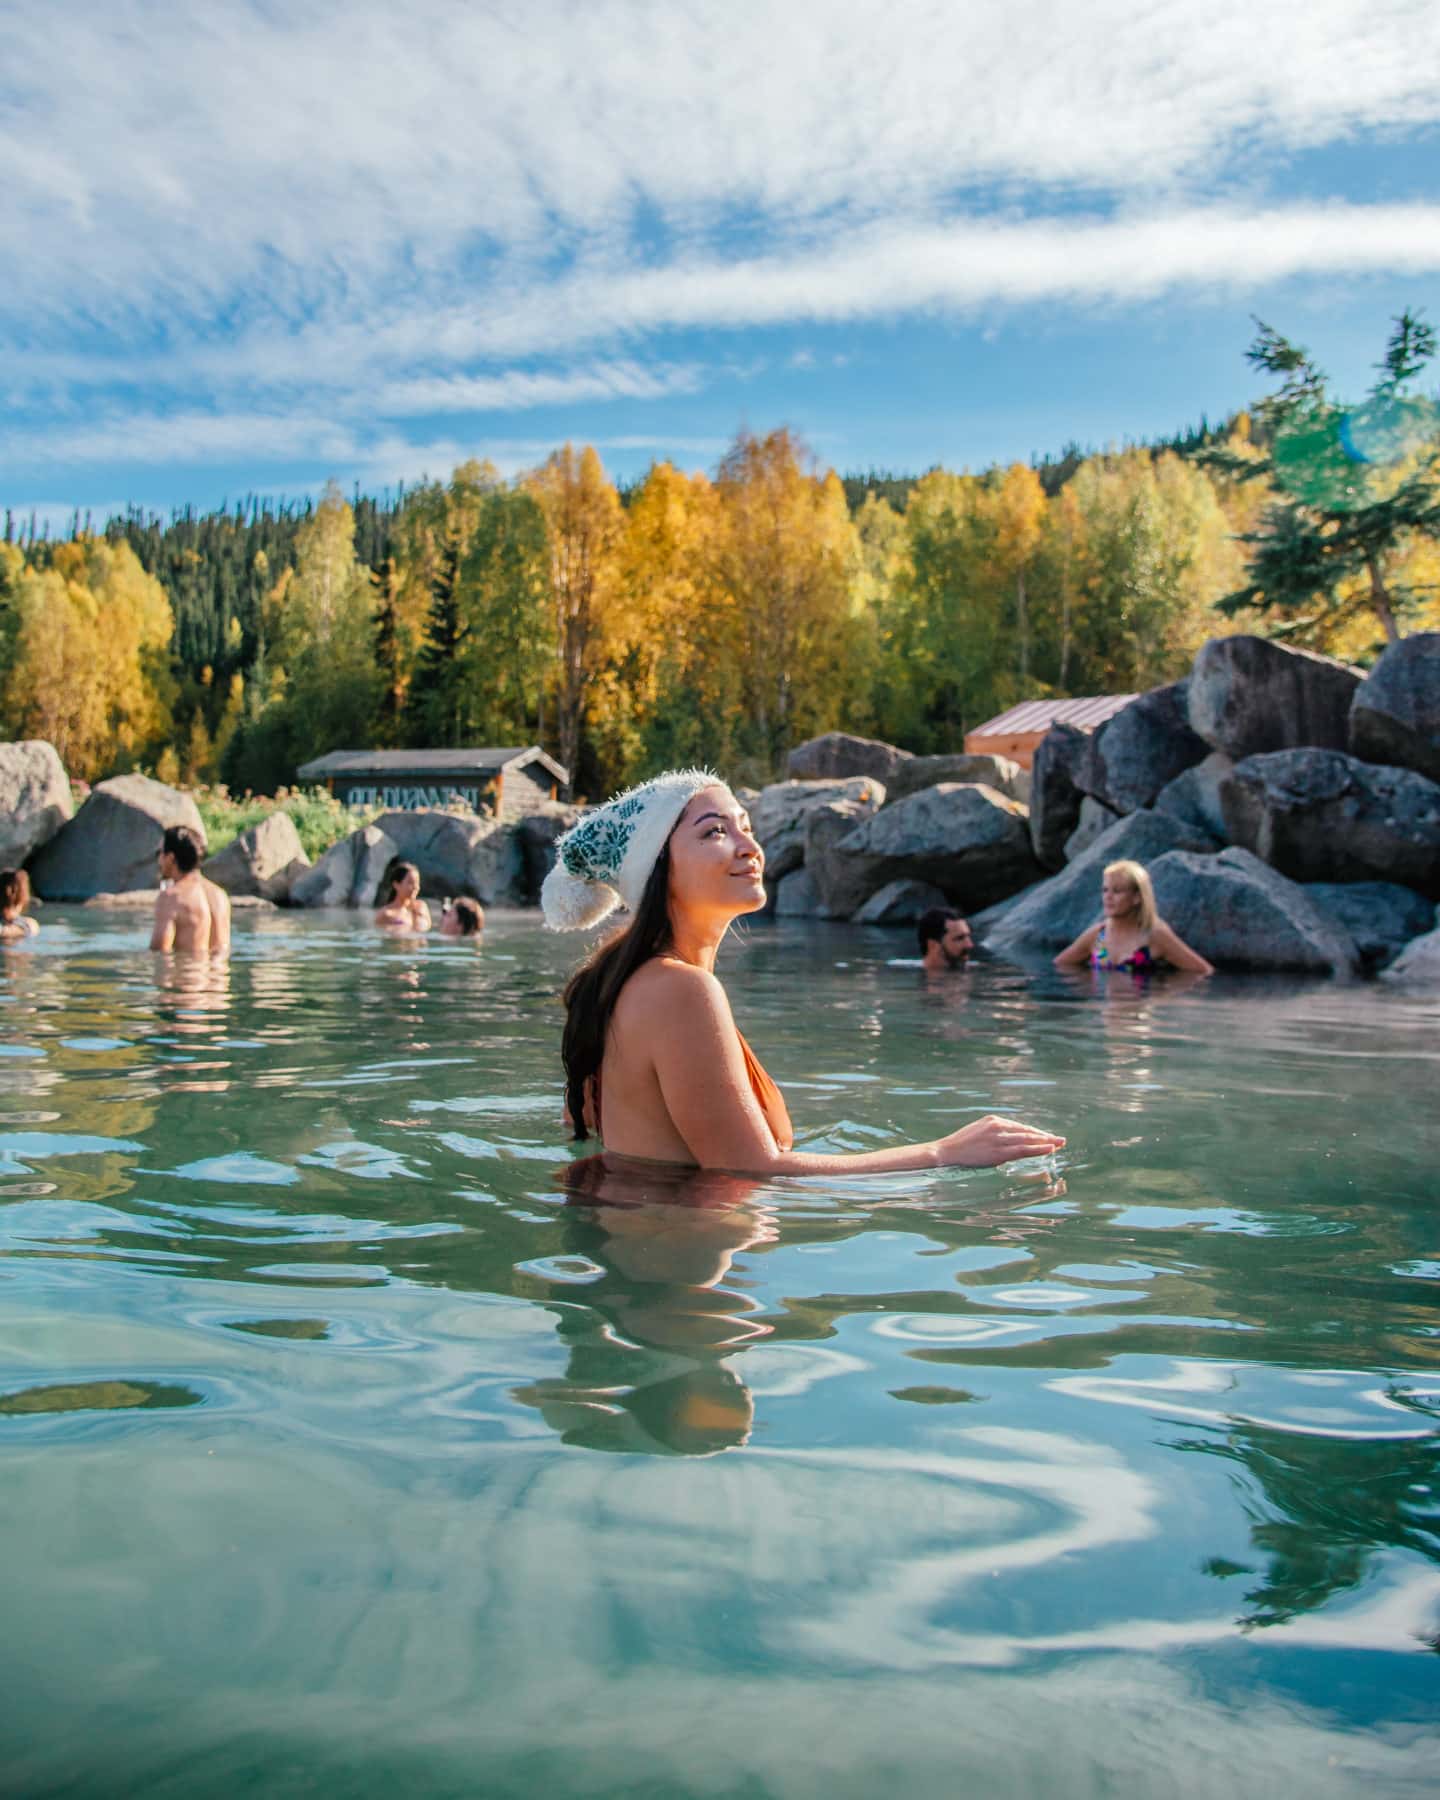 10 Best Things to Do in Fairbanks: Top Attractions & Places 